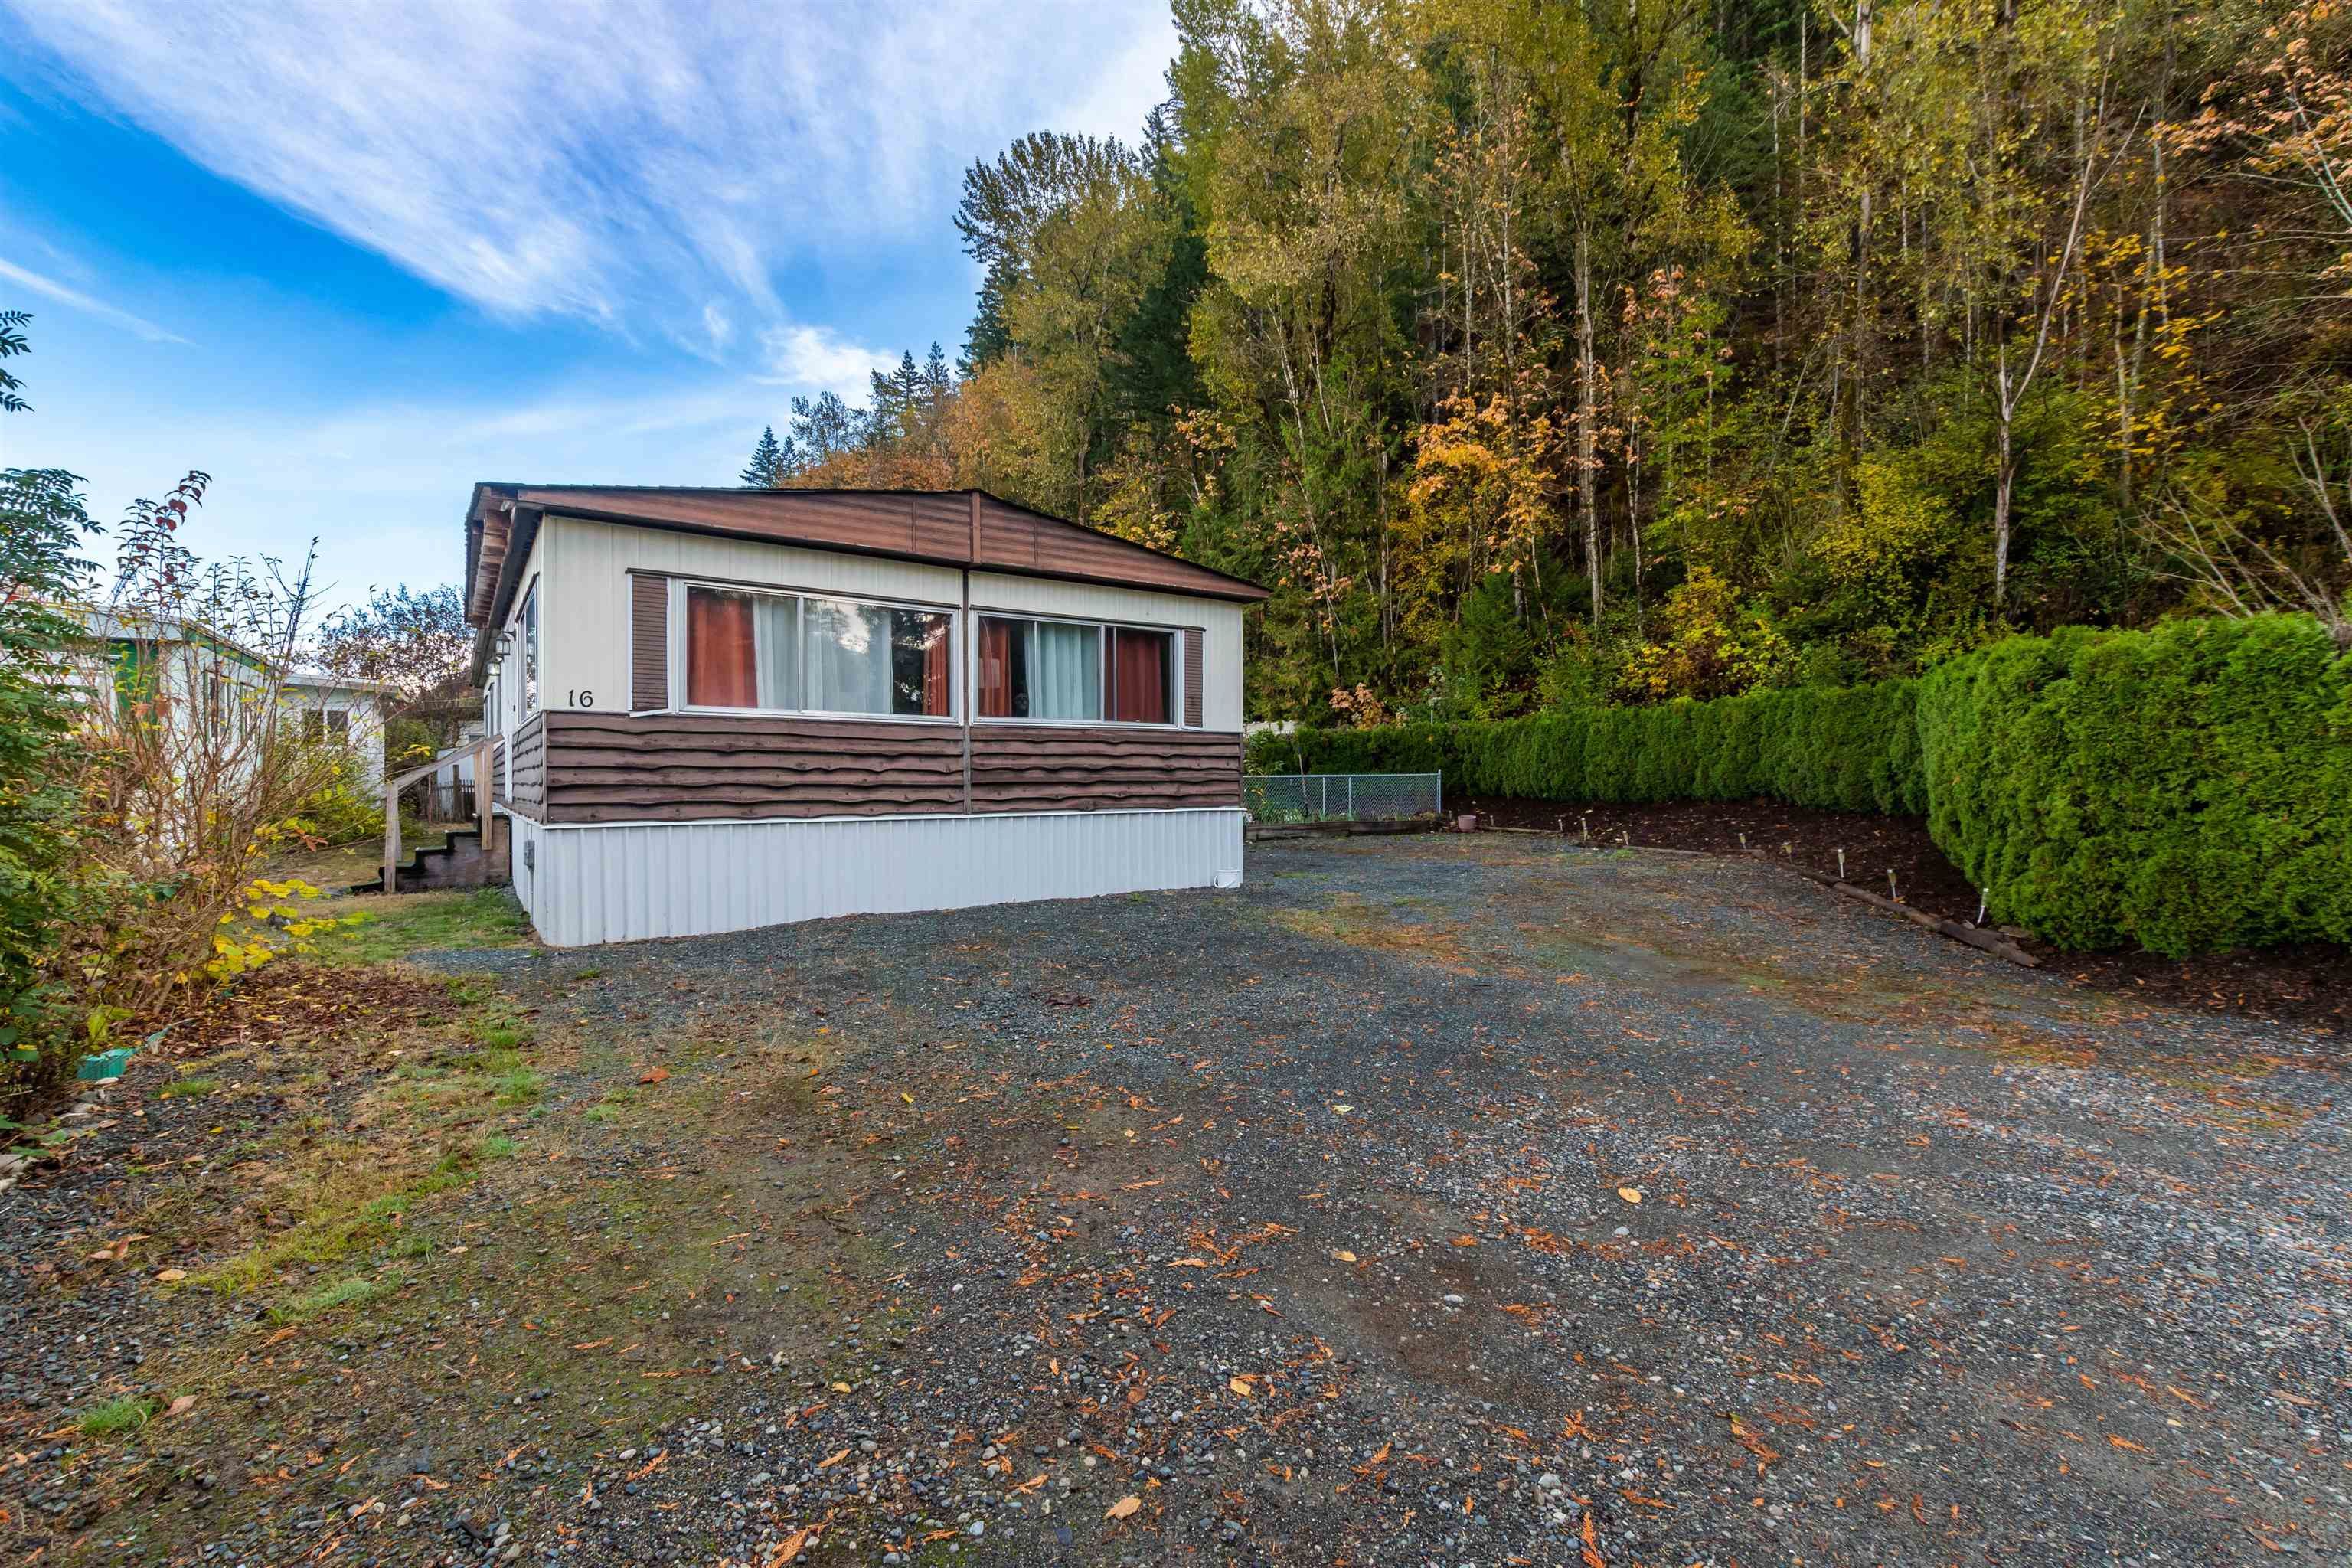 I have sold a property at 16 45715 ALMA AVE in Chilliwack
